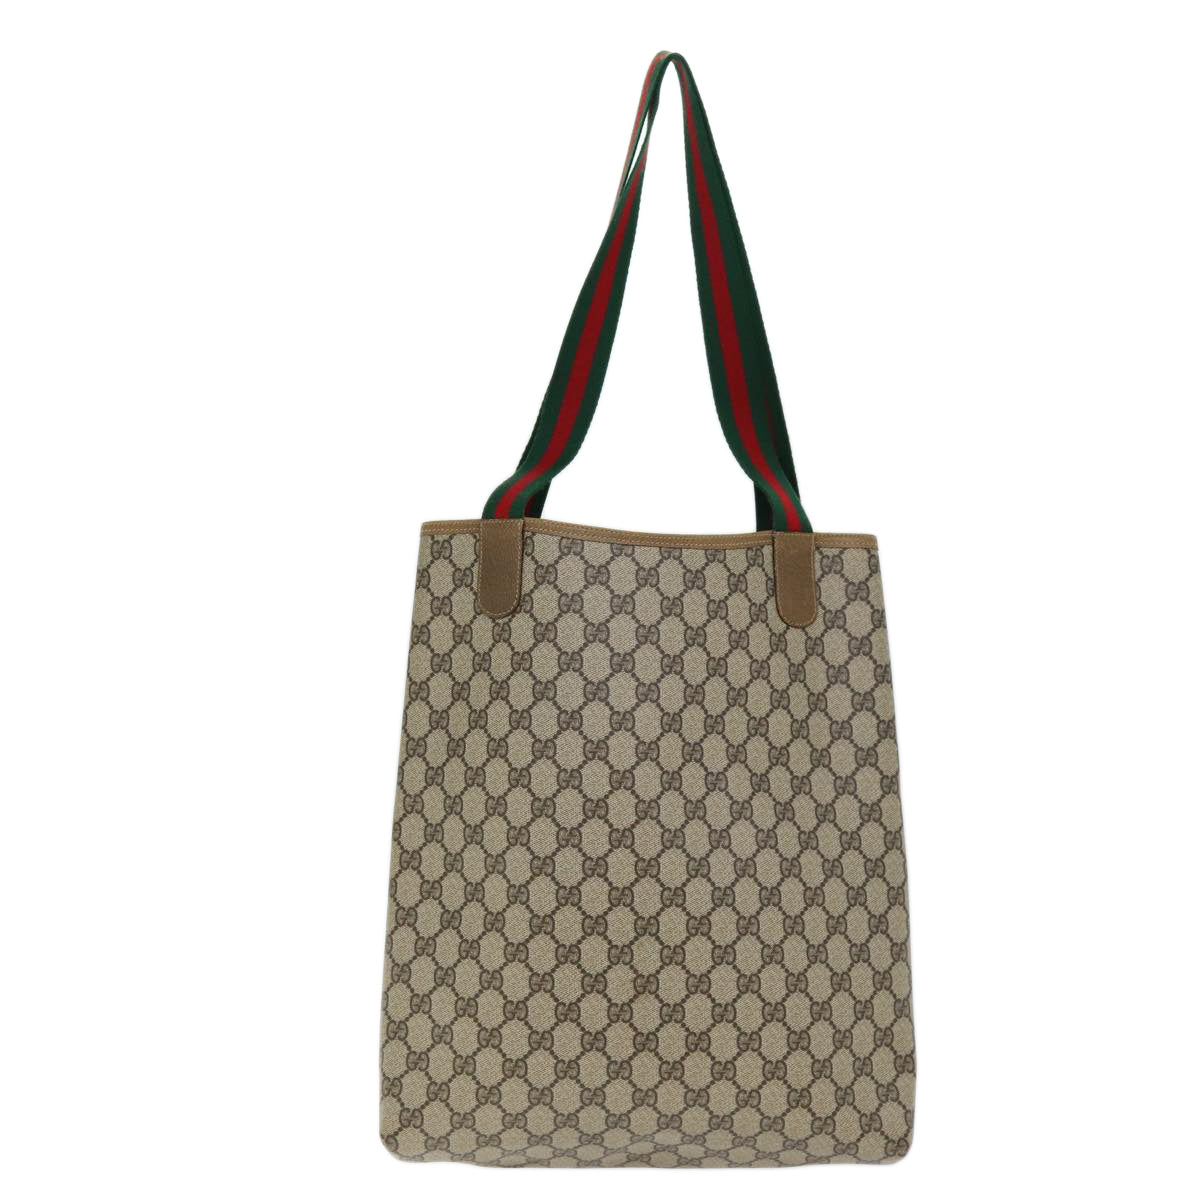 GUCCI GG Supreme Web Sherry Line Tote Bag PVC Beige Red 89 02 003 Auth yk12548